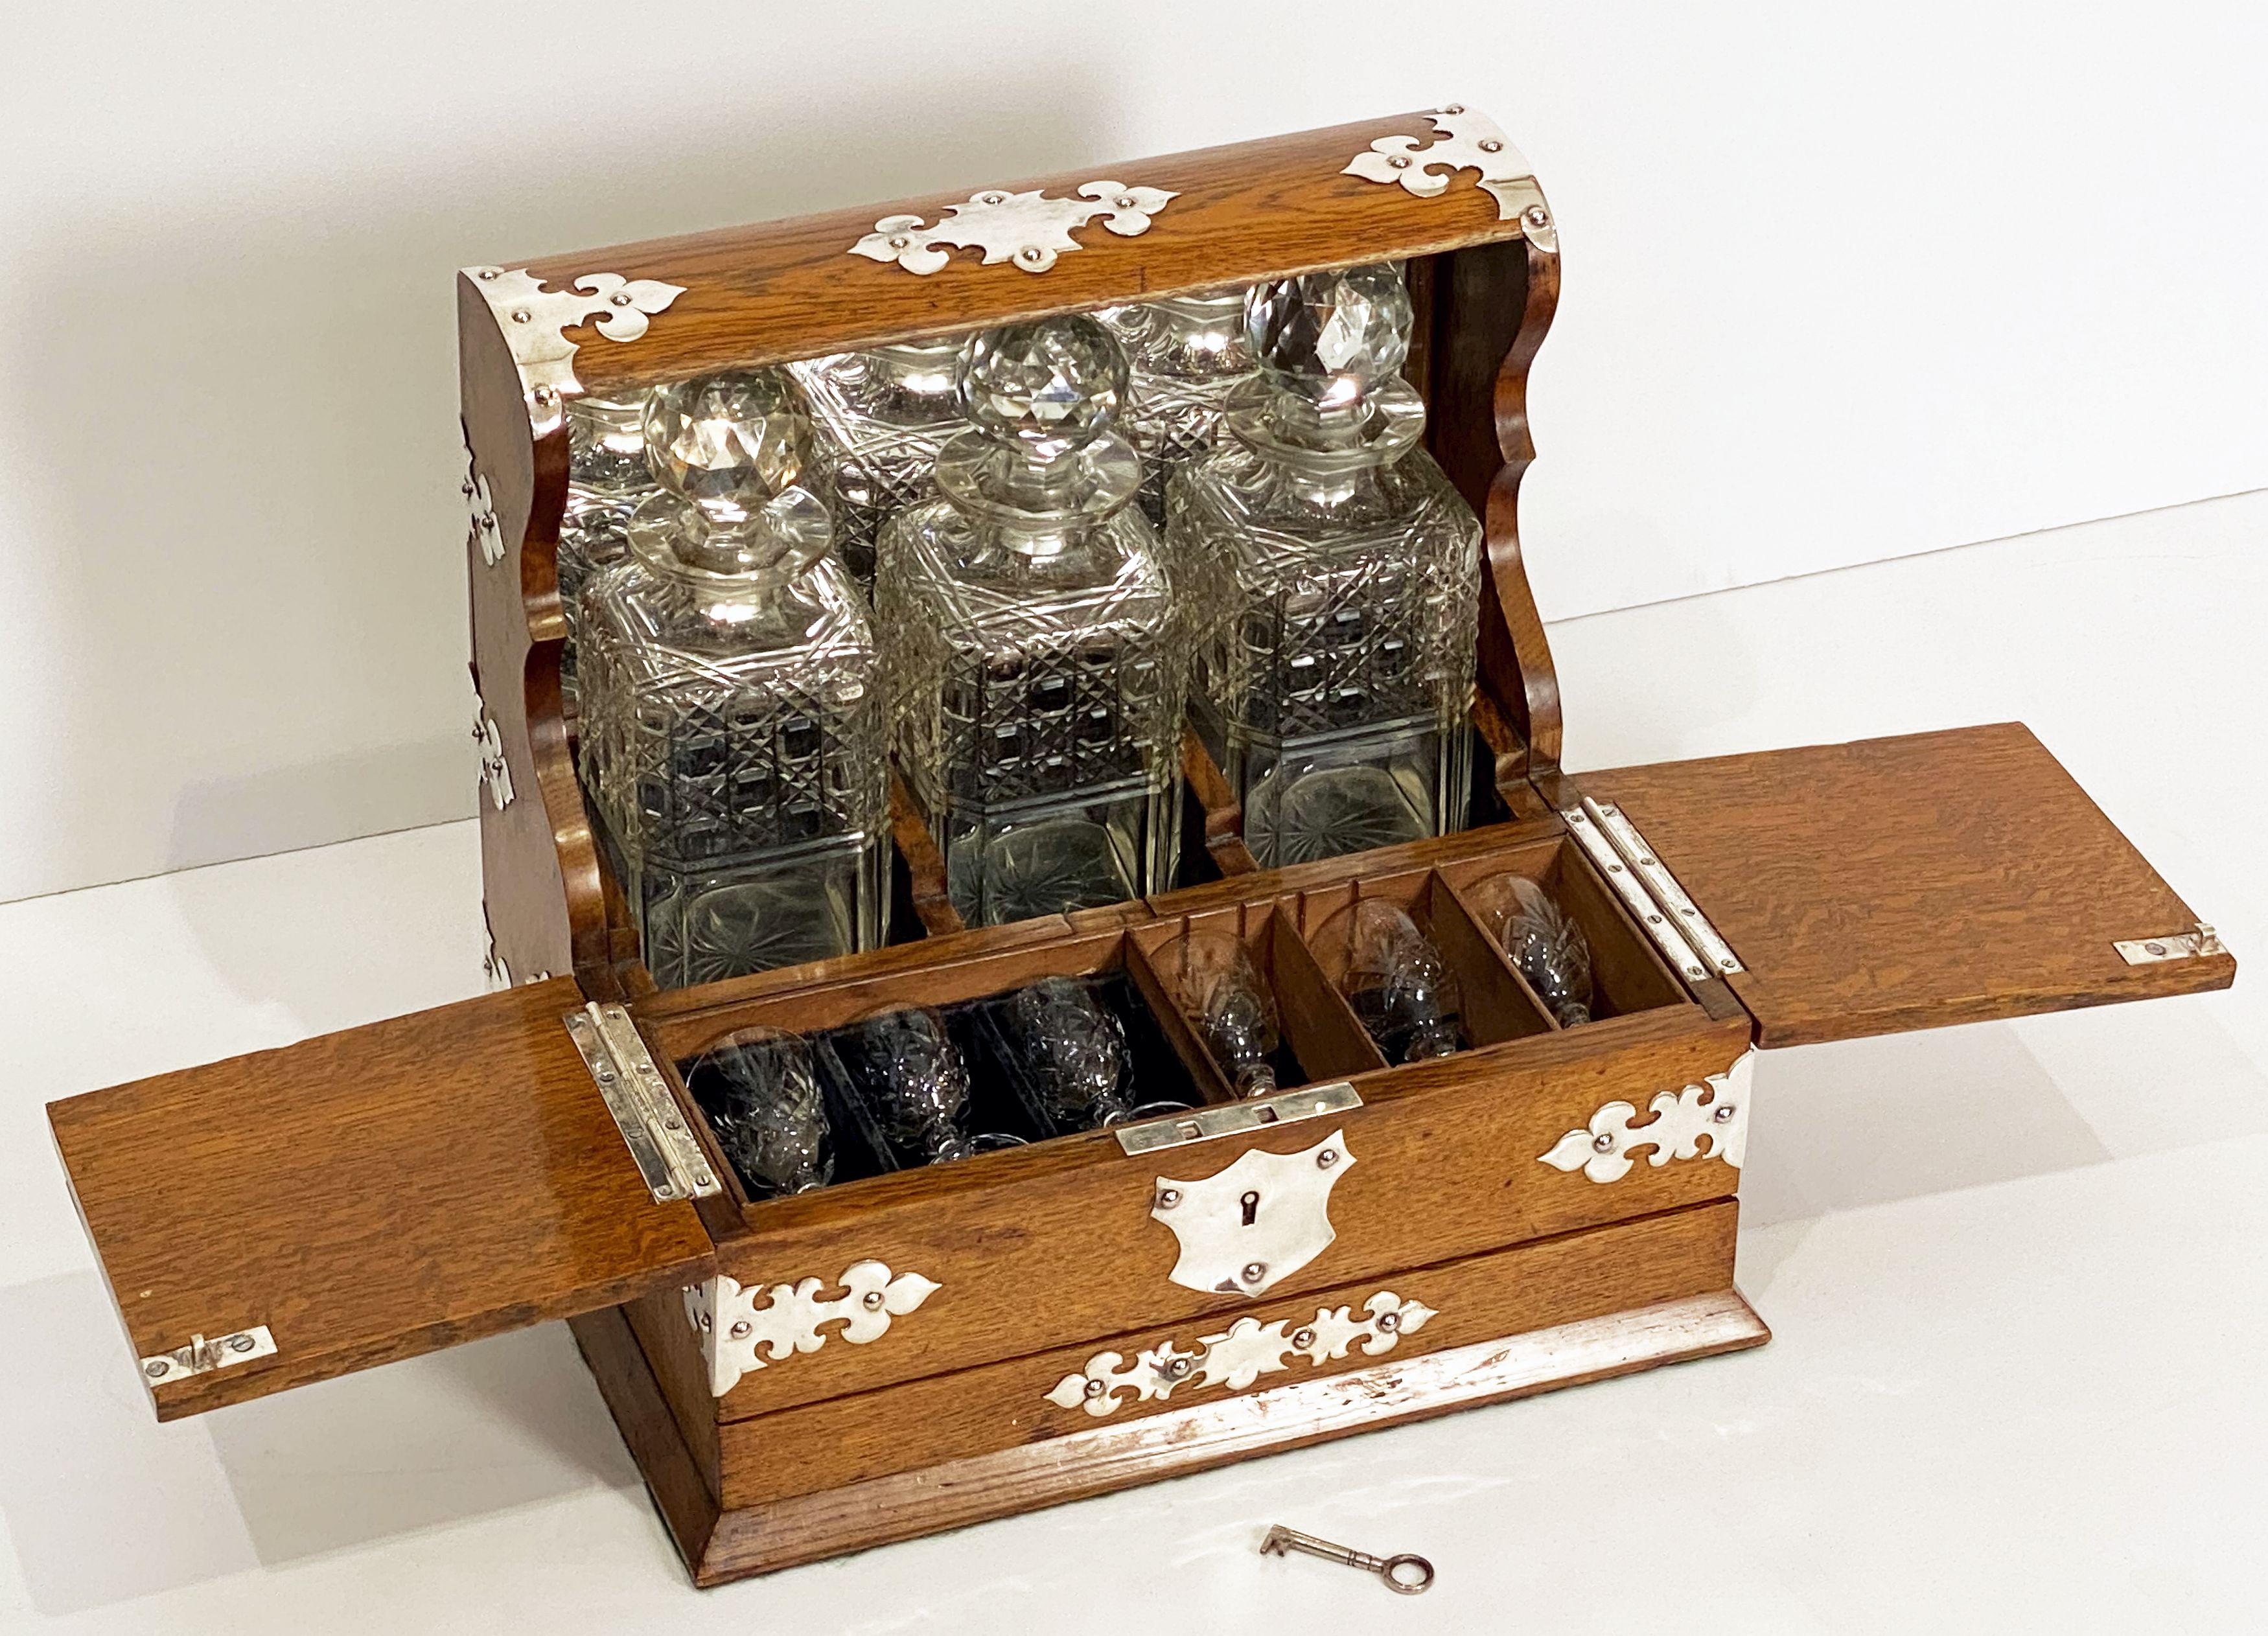 A fine English drinks tantalus of silver-mounted patinated oak with three decanters and a games drawer compendium from the Edwardian era.
Featuring a top mount enclosing three square cut-glass spirits decanters within a fitted mirror-back